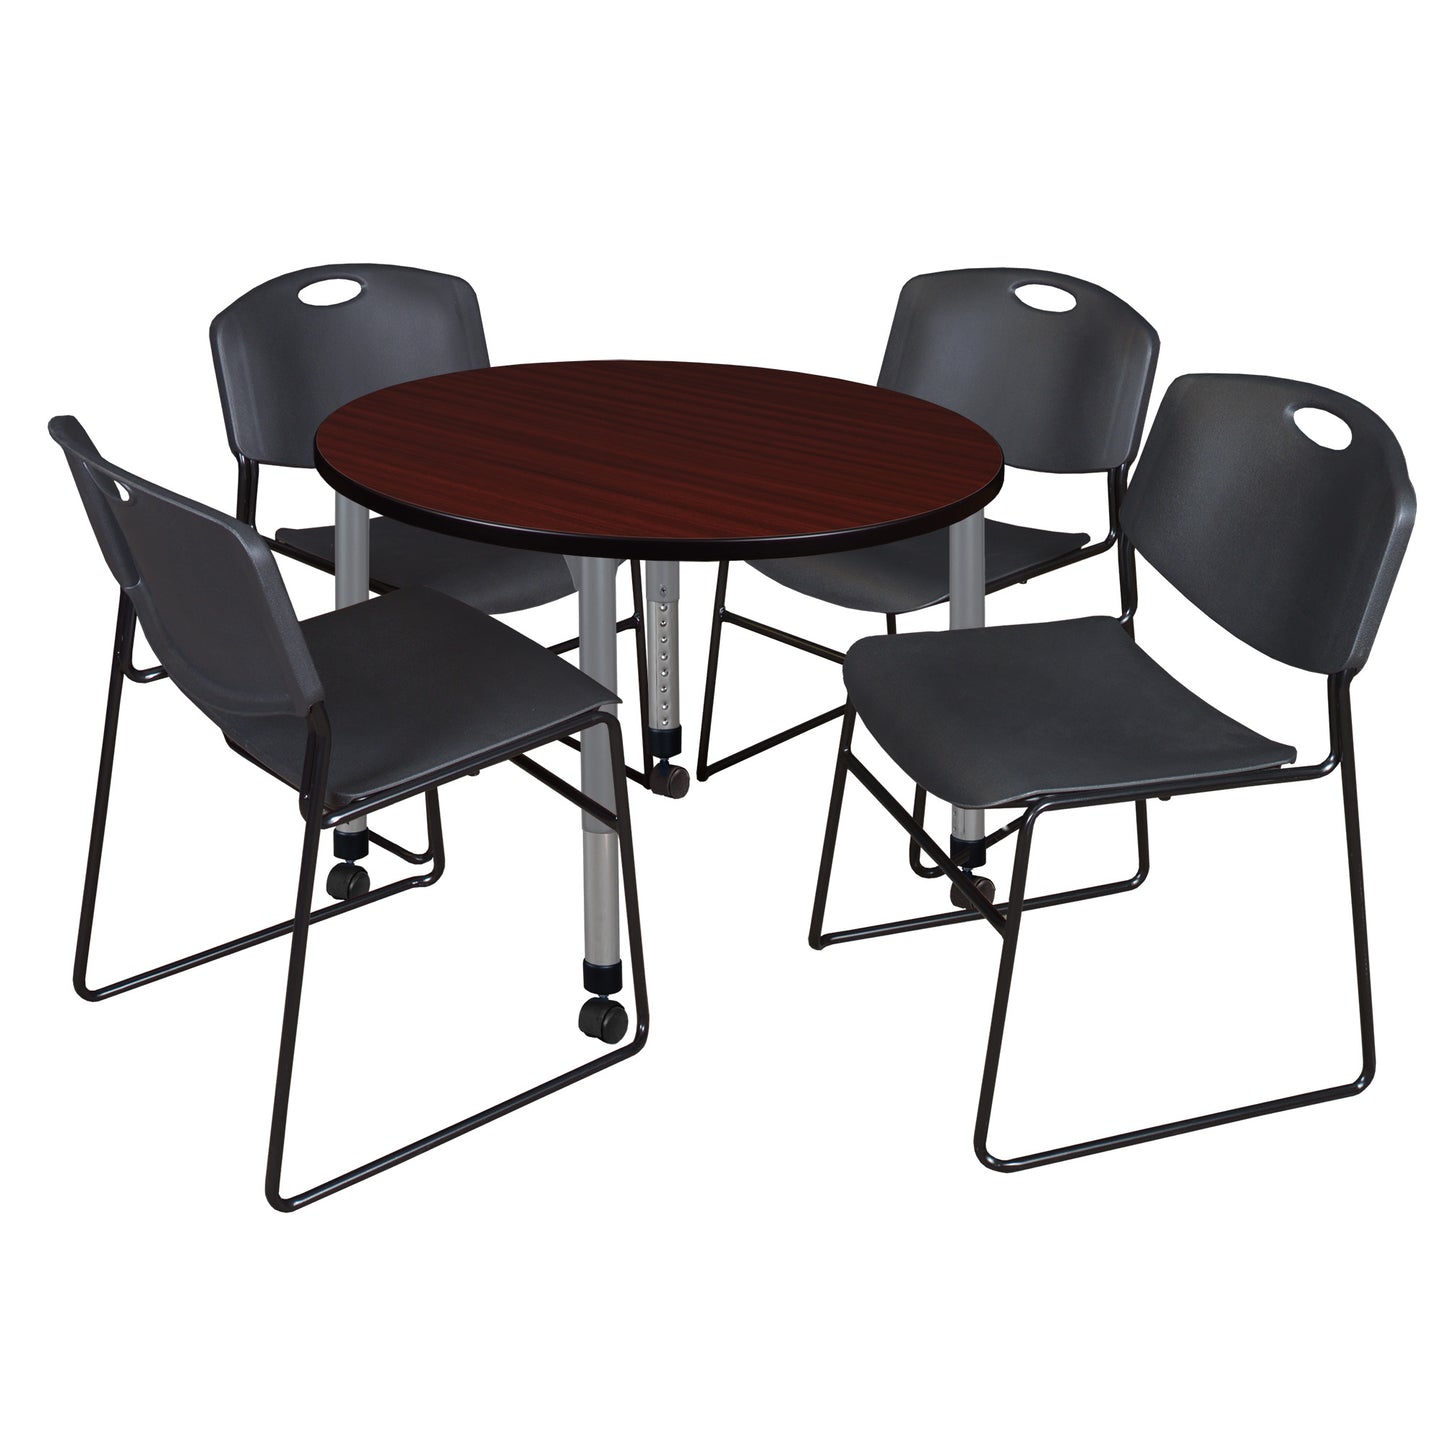 Regency Kee 42 in. Round Adjustable Classroom Table & 4 Zeng Stack Chairs